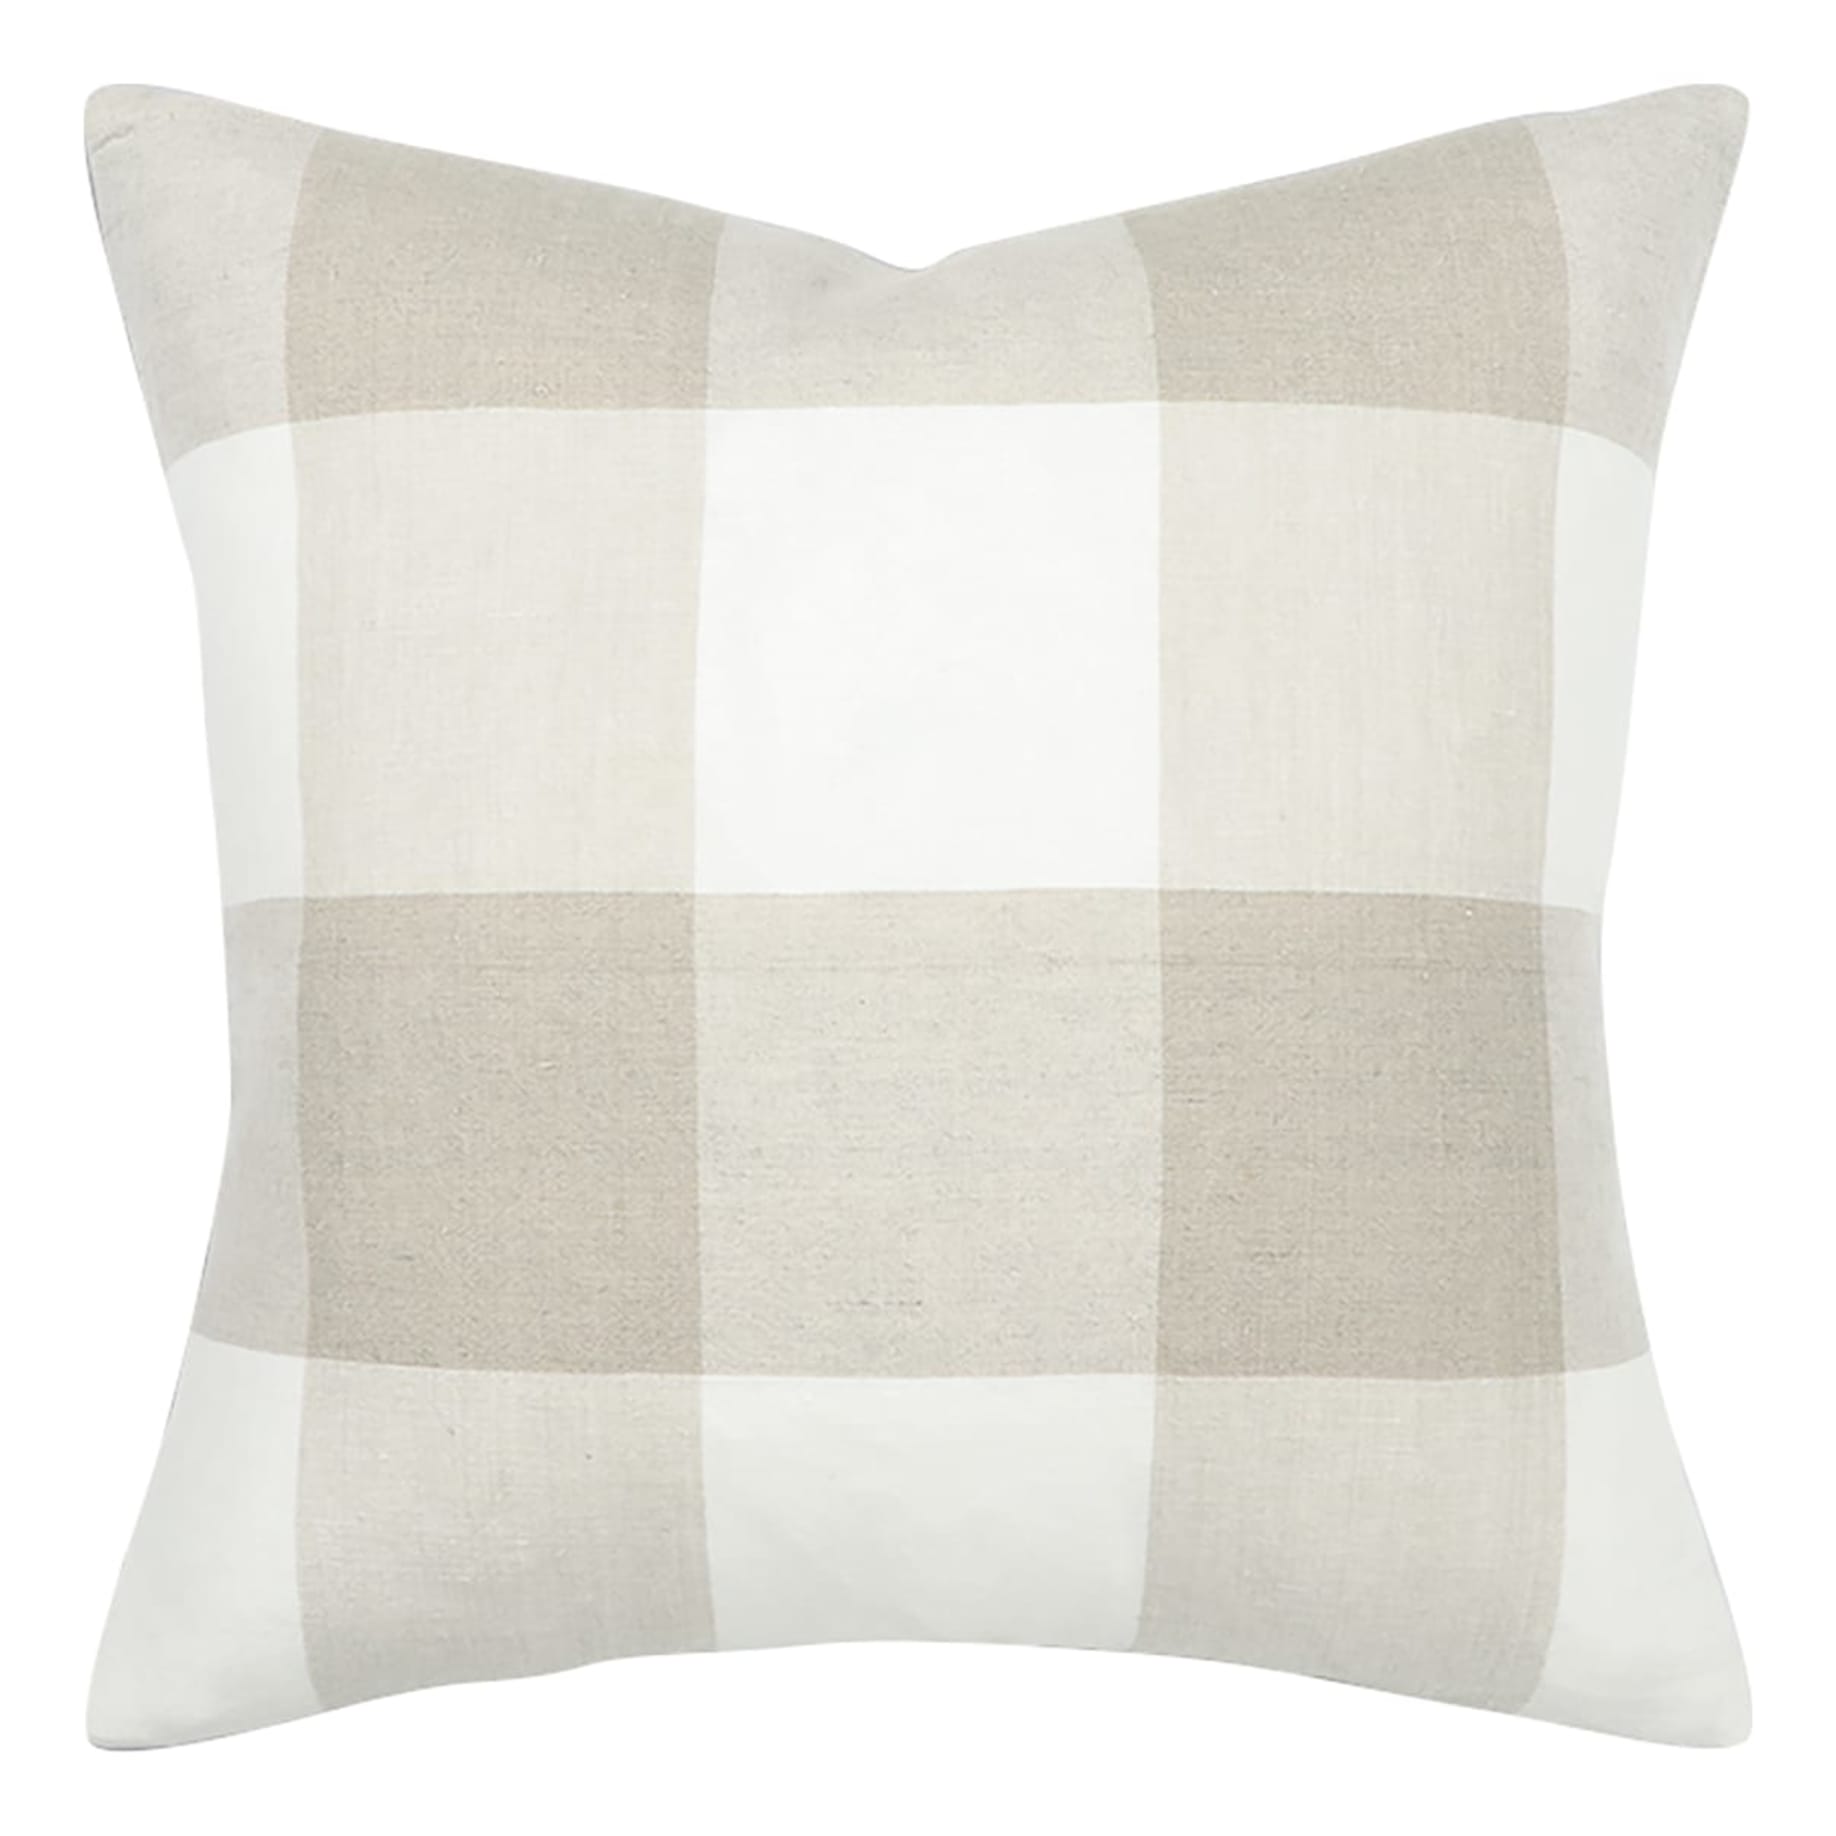 Archer Feather Fill Cushion 50x50cm in Natural